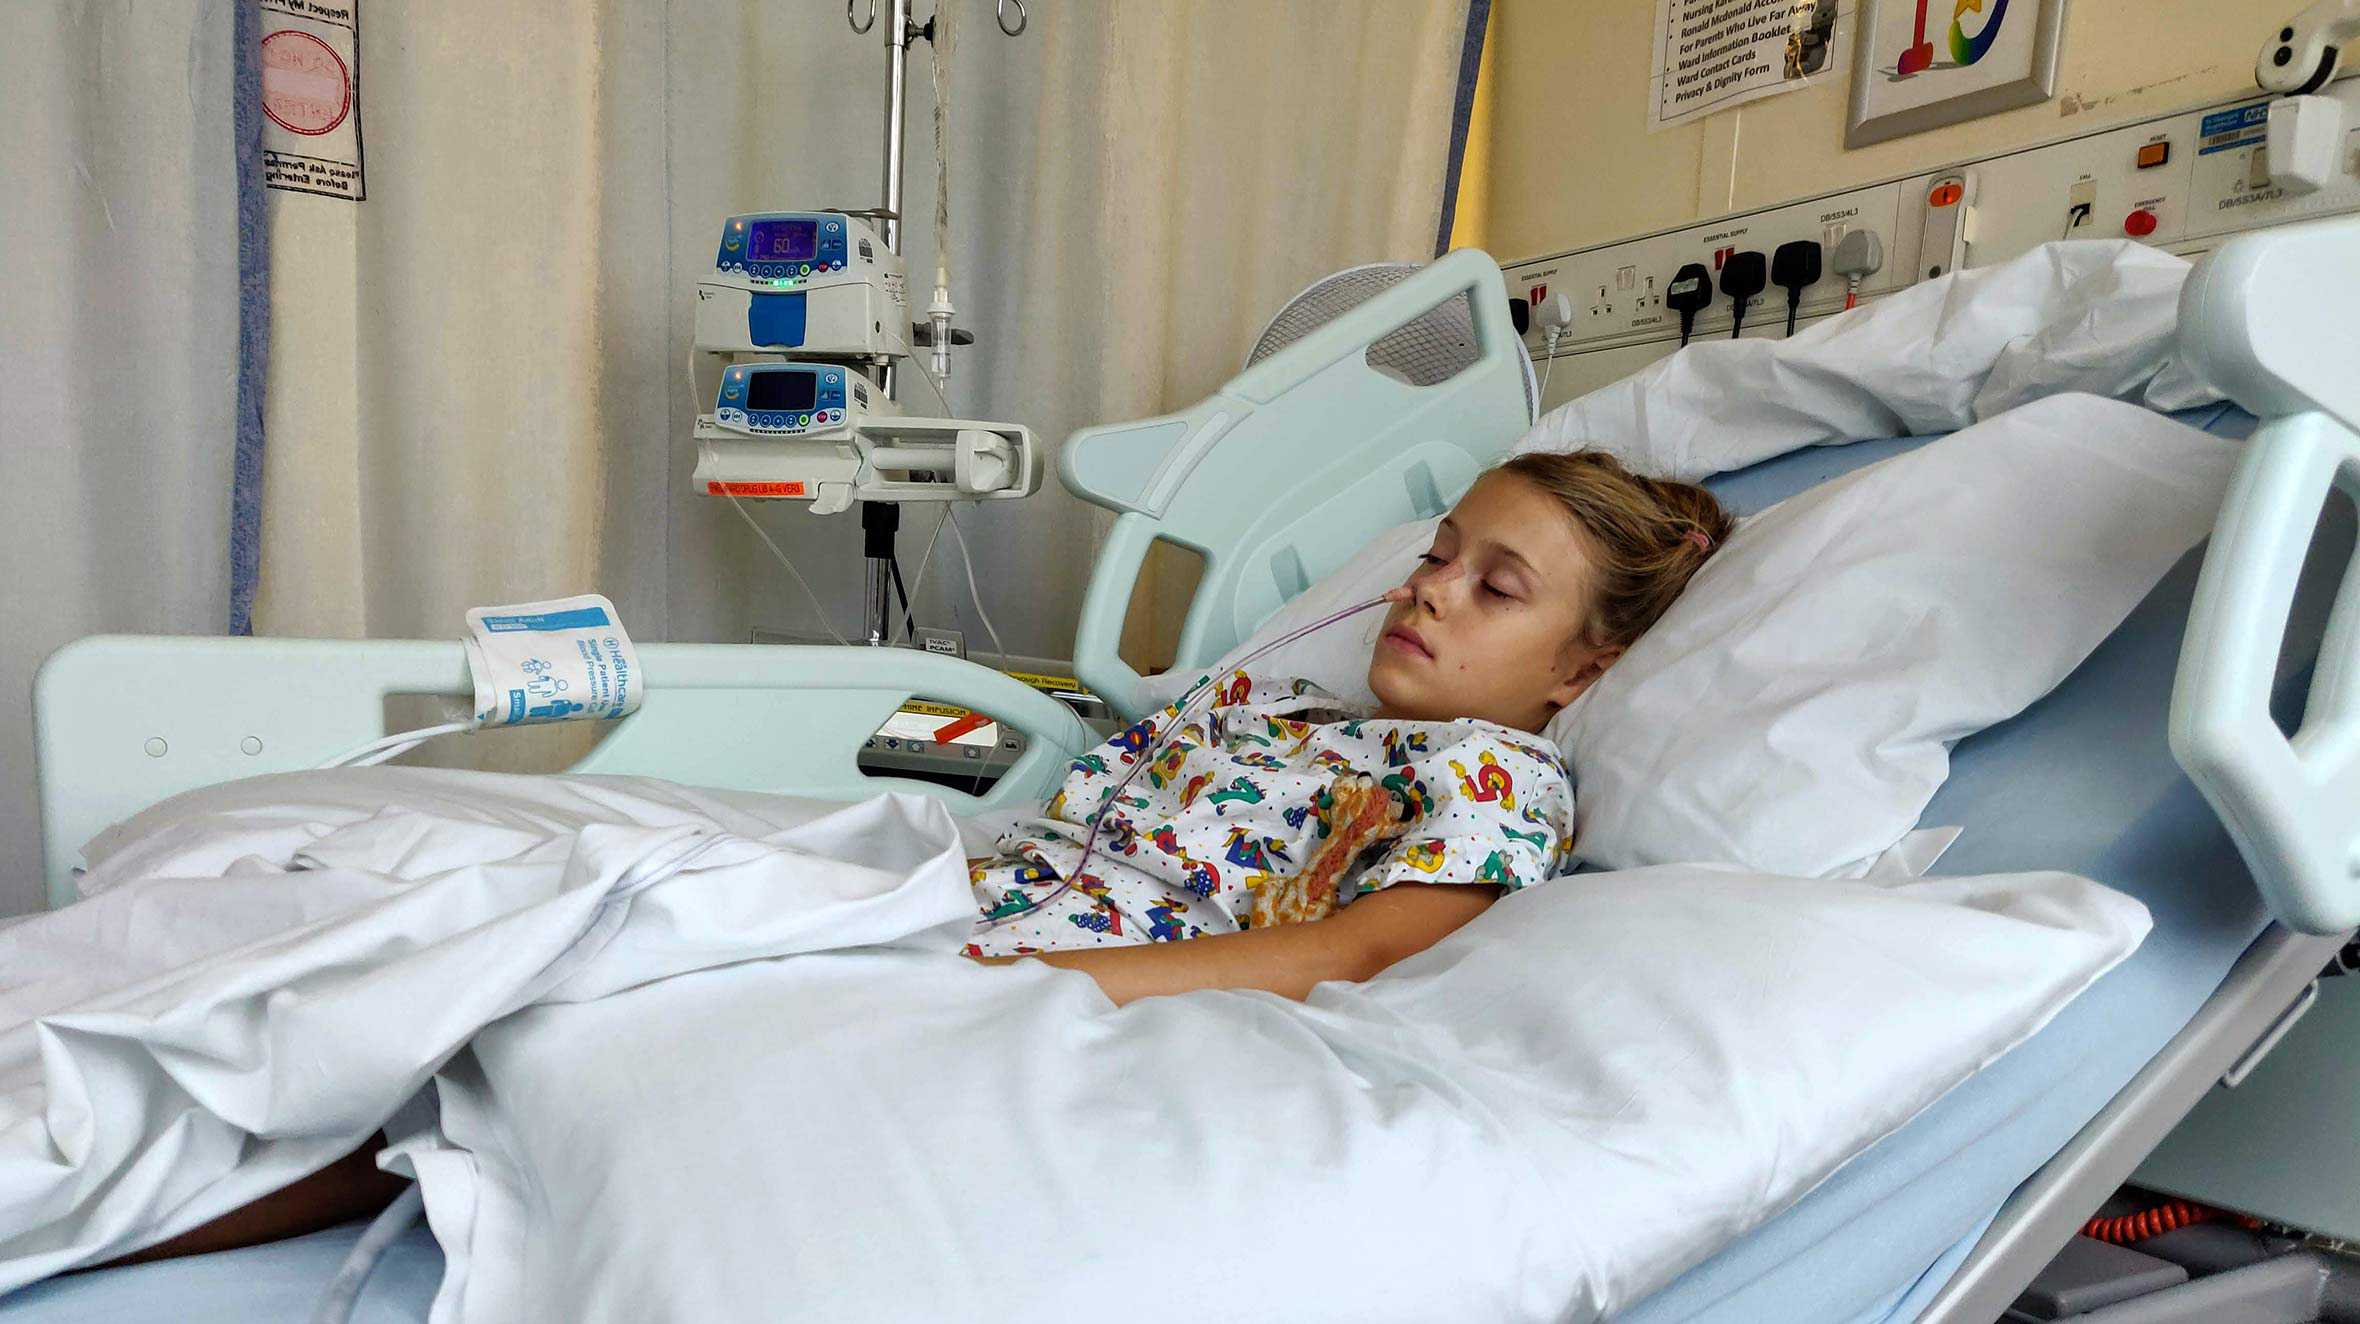 Leila in her hospital bed during treatment for her condition.